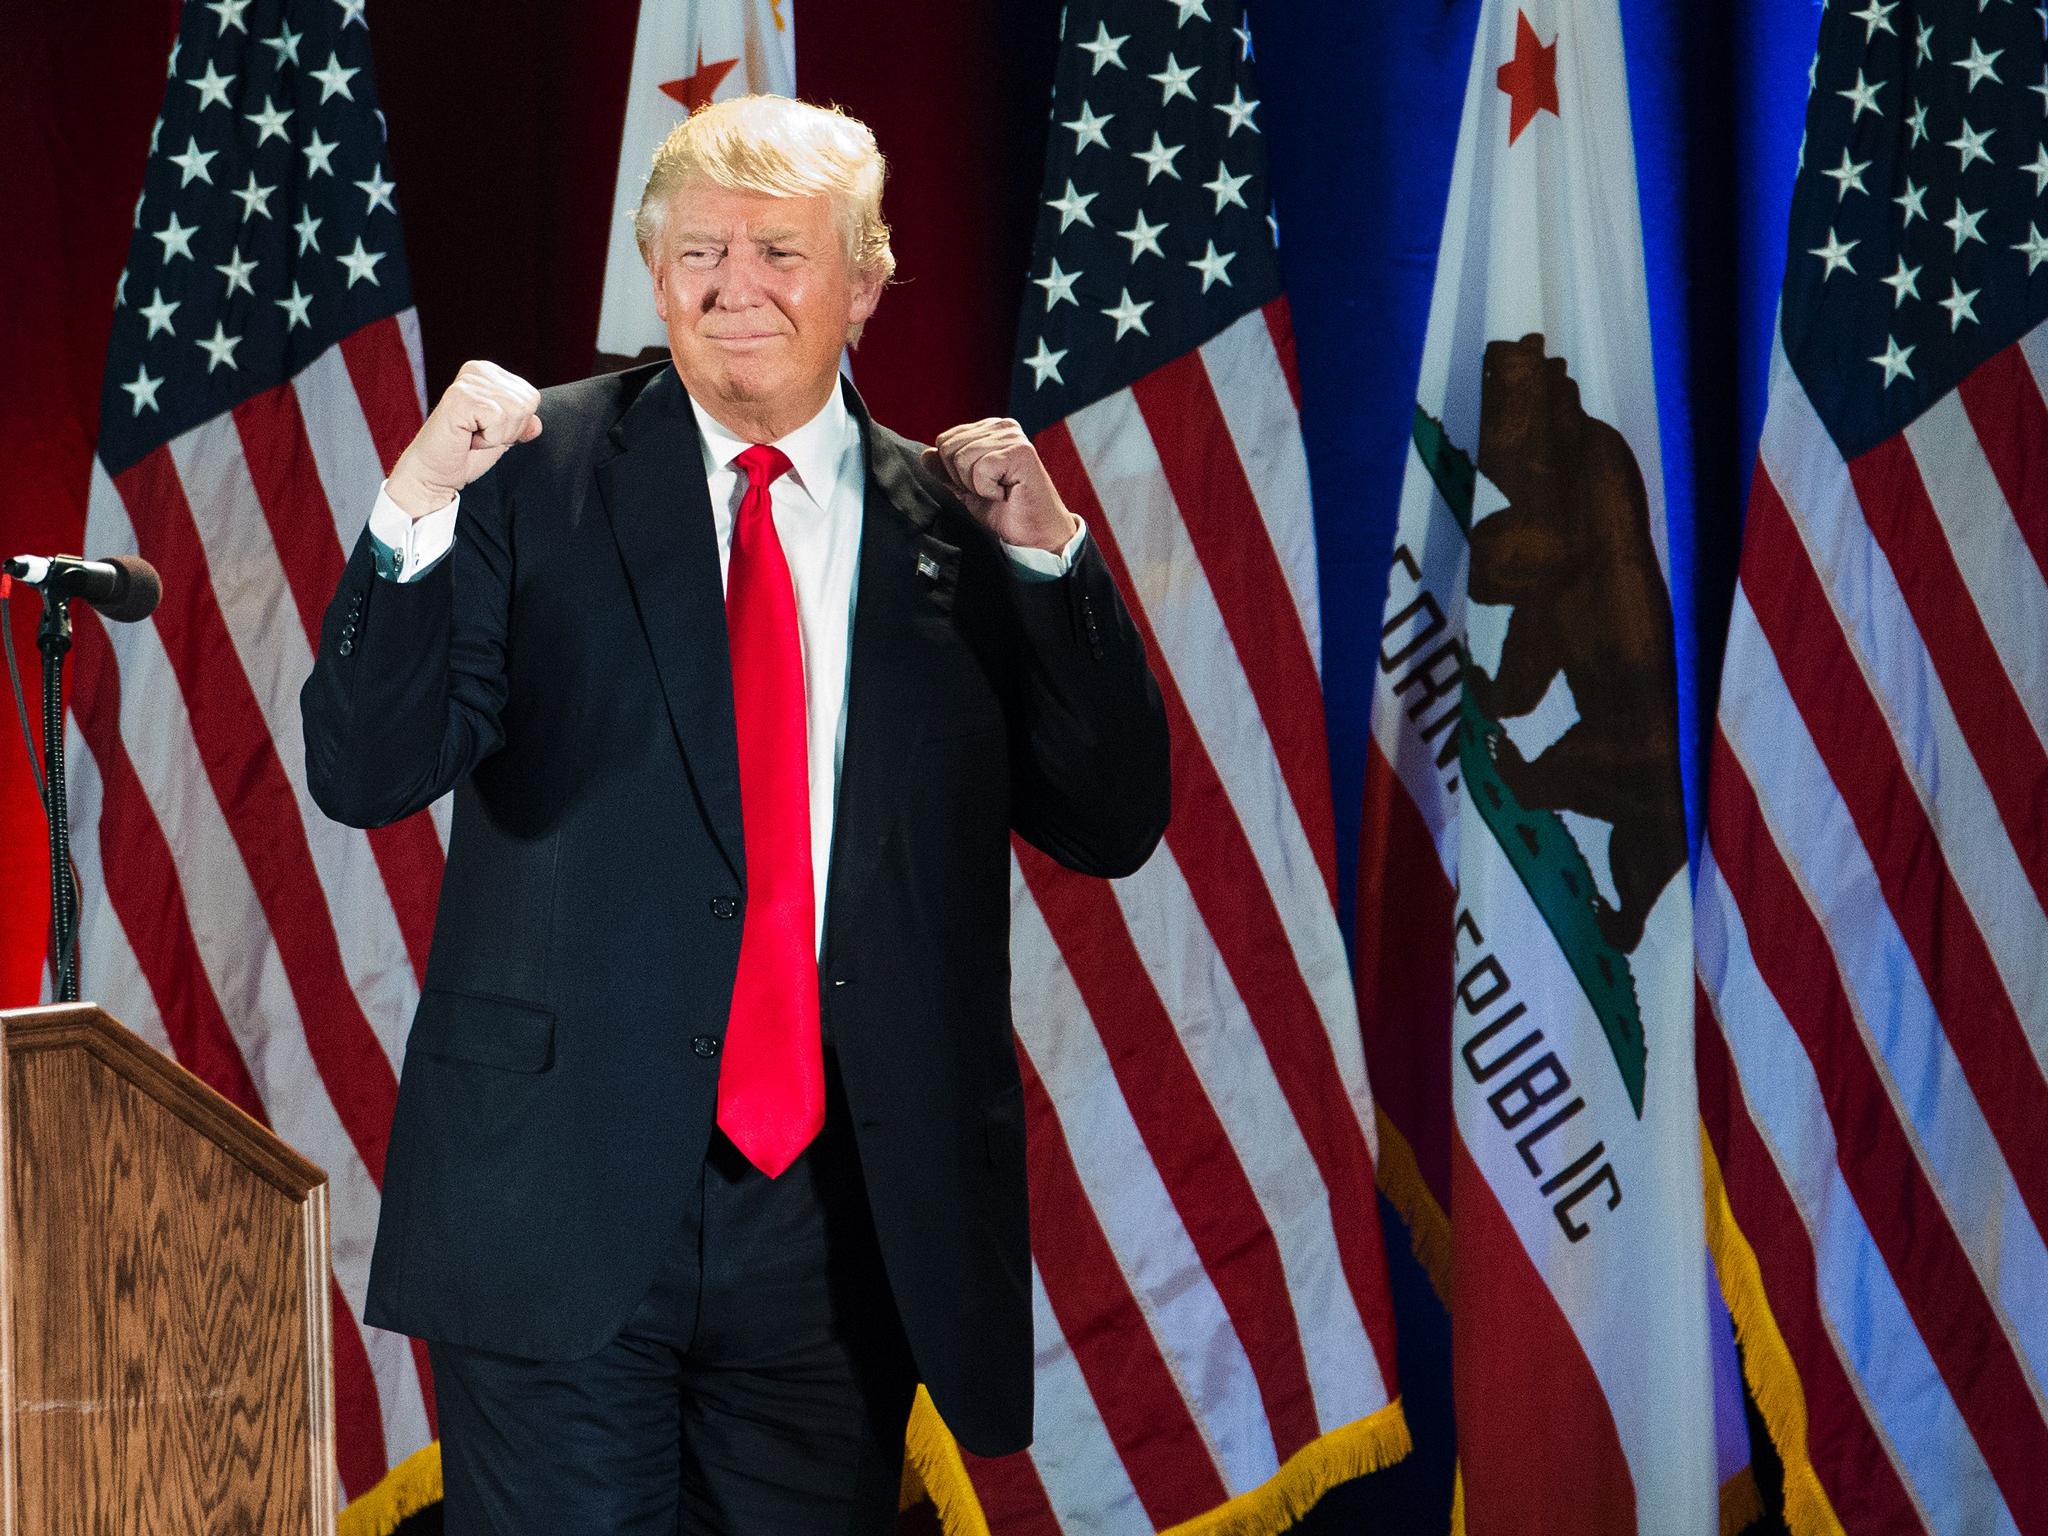 Trump appears at a 2 June campaign event in California Josh Edelson/Getty